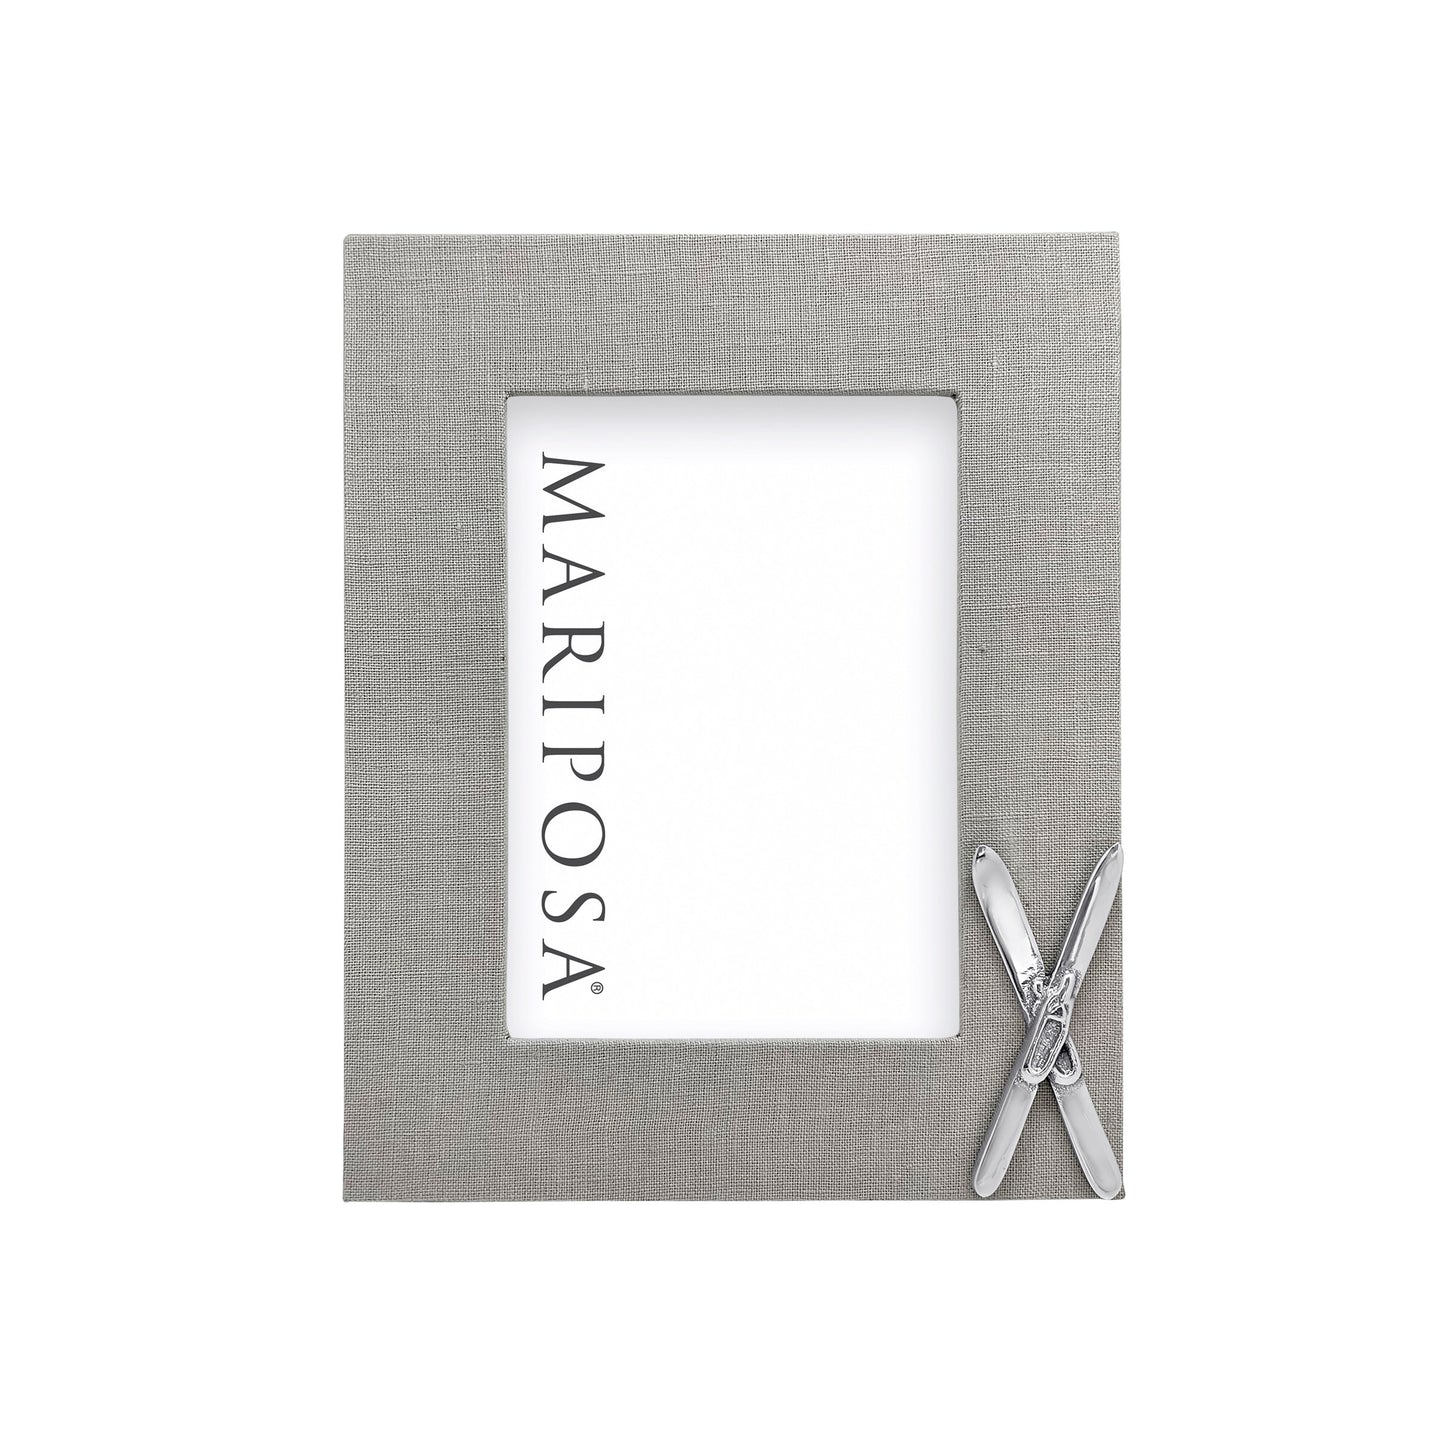 Grey Linen 5x7 Picture Frame with Silver Skis